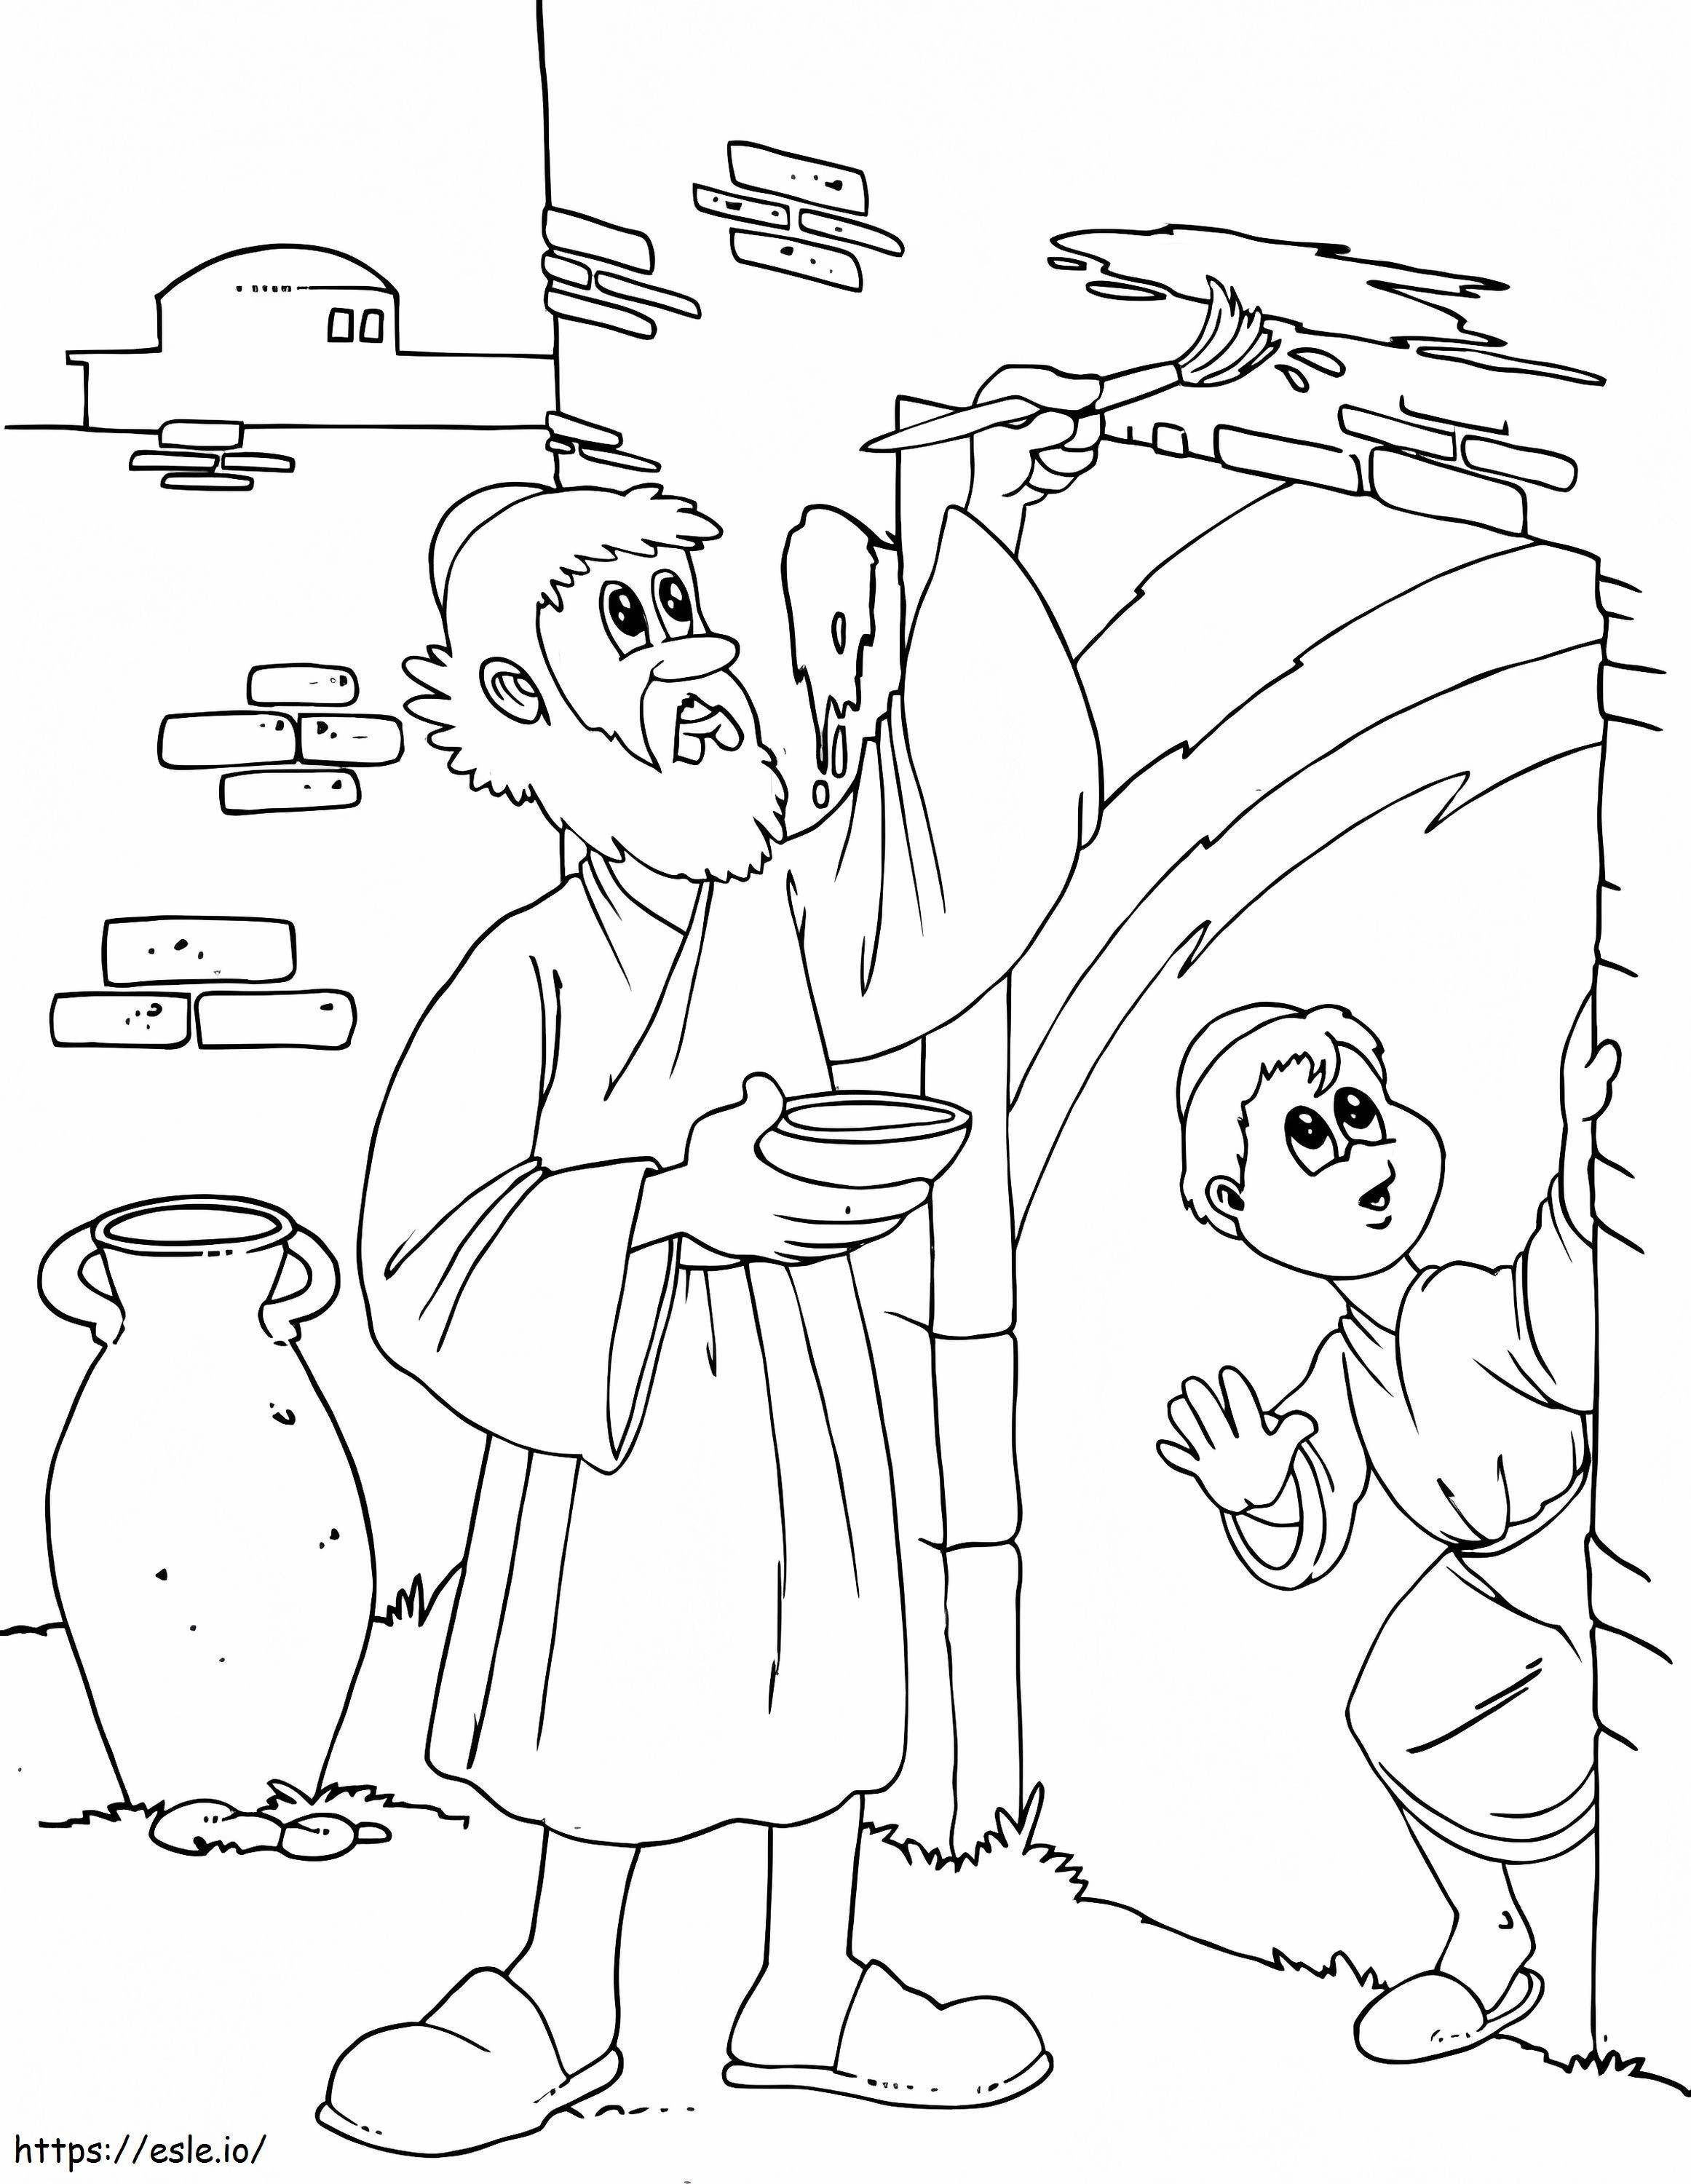 Passover Coloring Page 2 coloring page